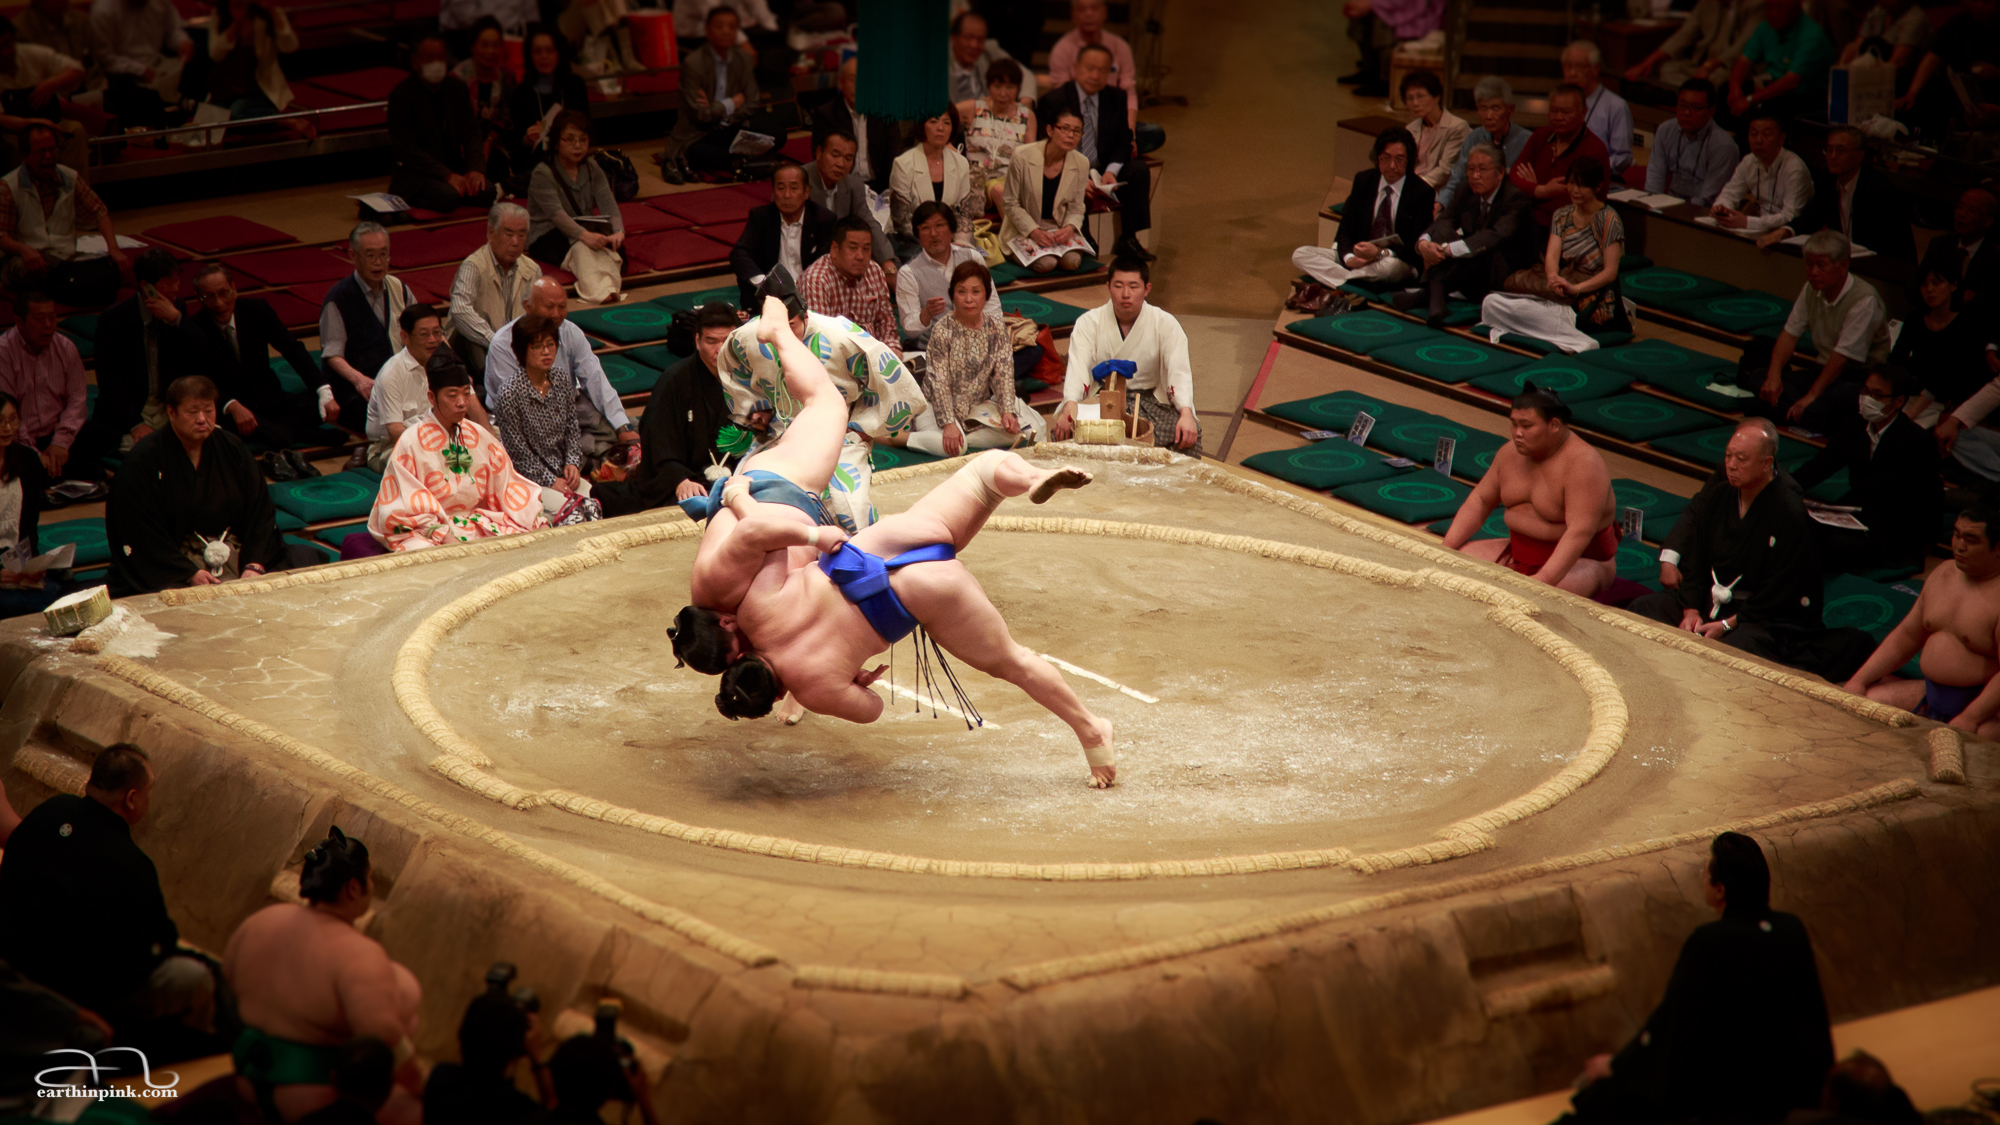 An unusually action-packed sumo wrestle at the tournament in Tokyo in May 2014. Most fights are over in the blink of an eye with one of the wrestlers stepping outside the ring, but this was a captivating exception.